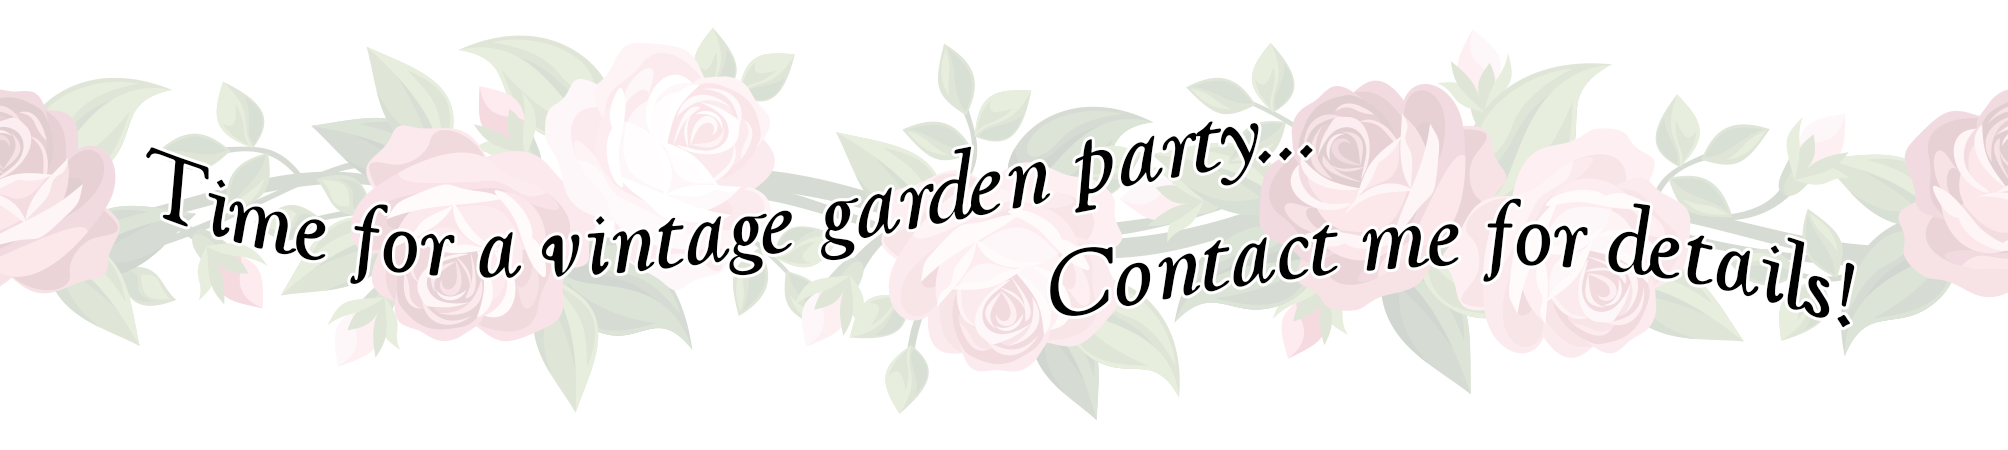 GardenParty.png